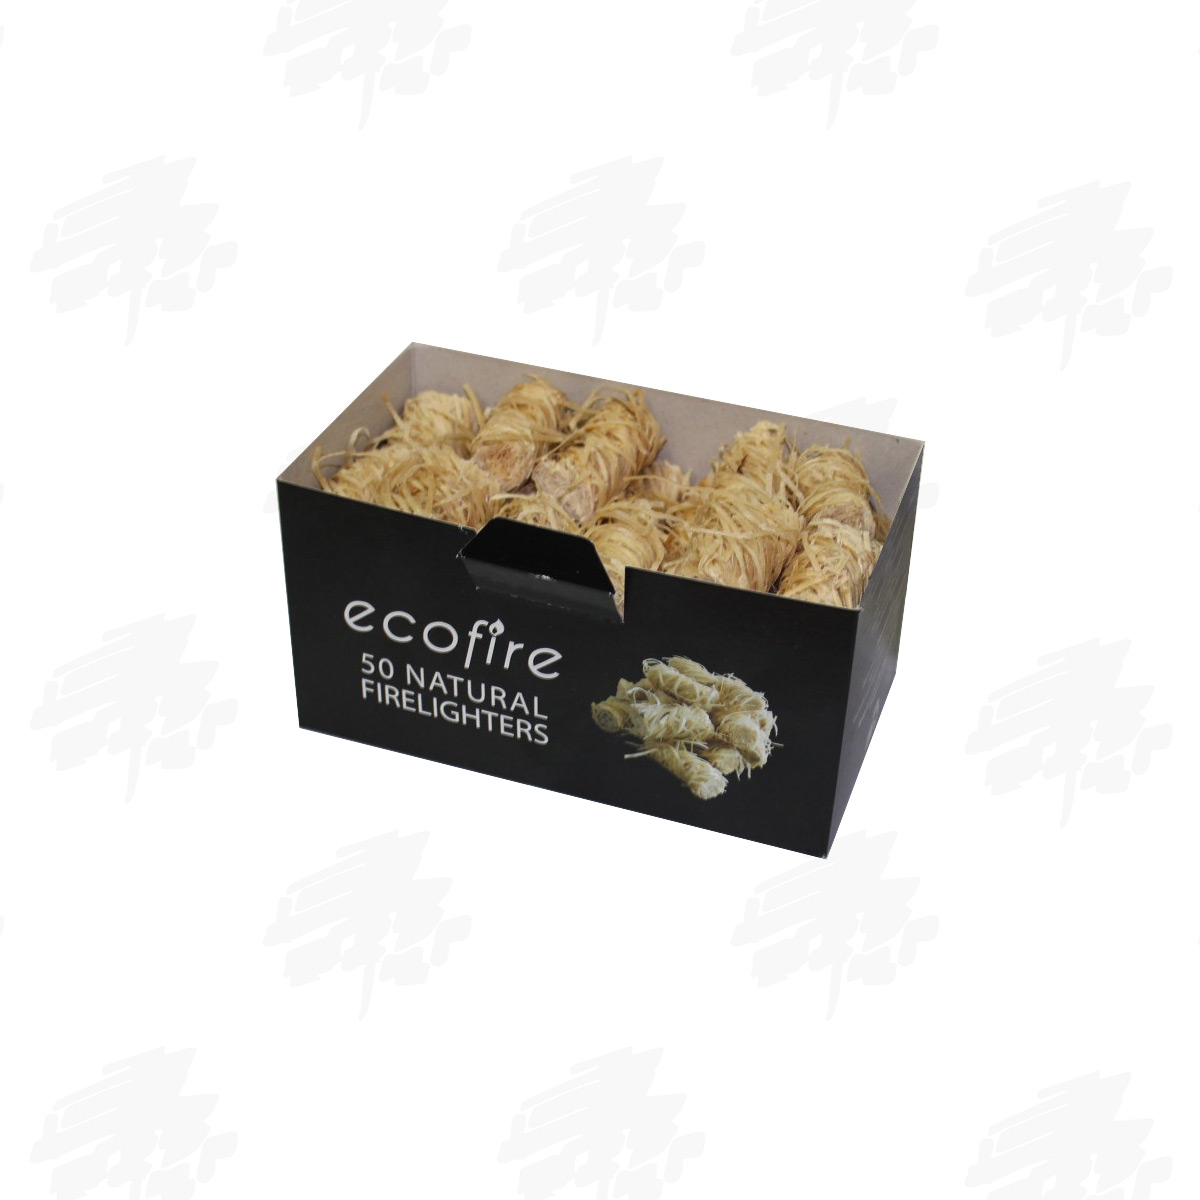 Ecofire - 50 Natural Firelighters